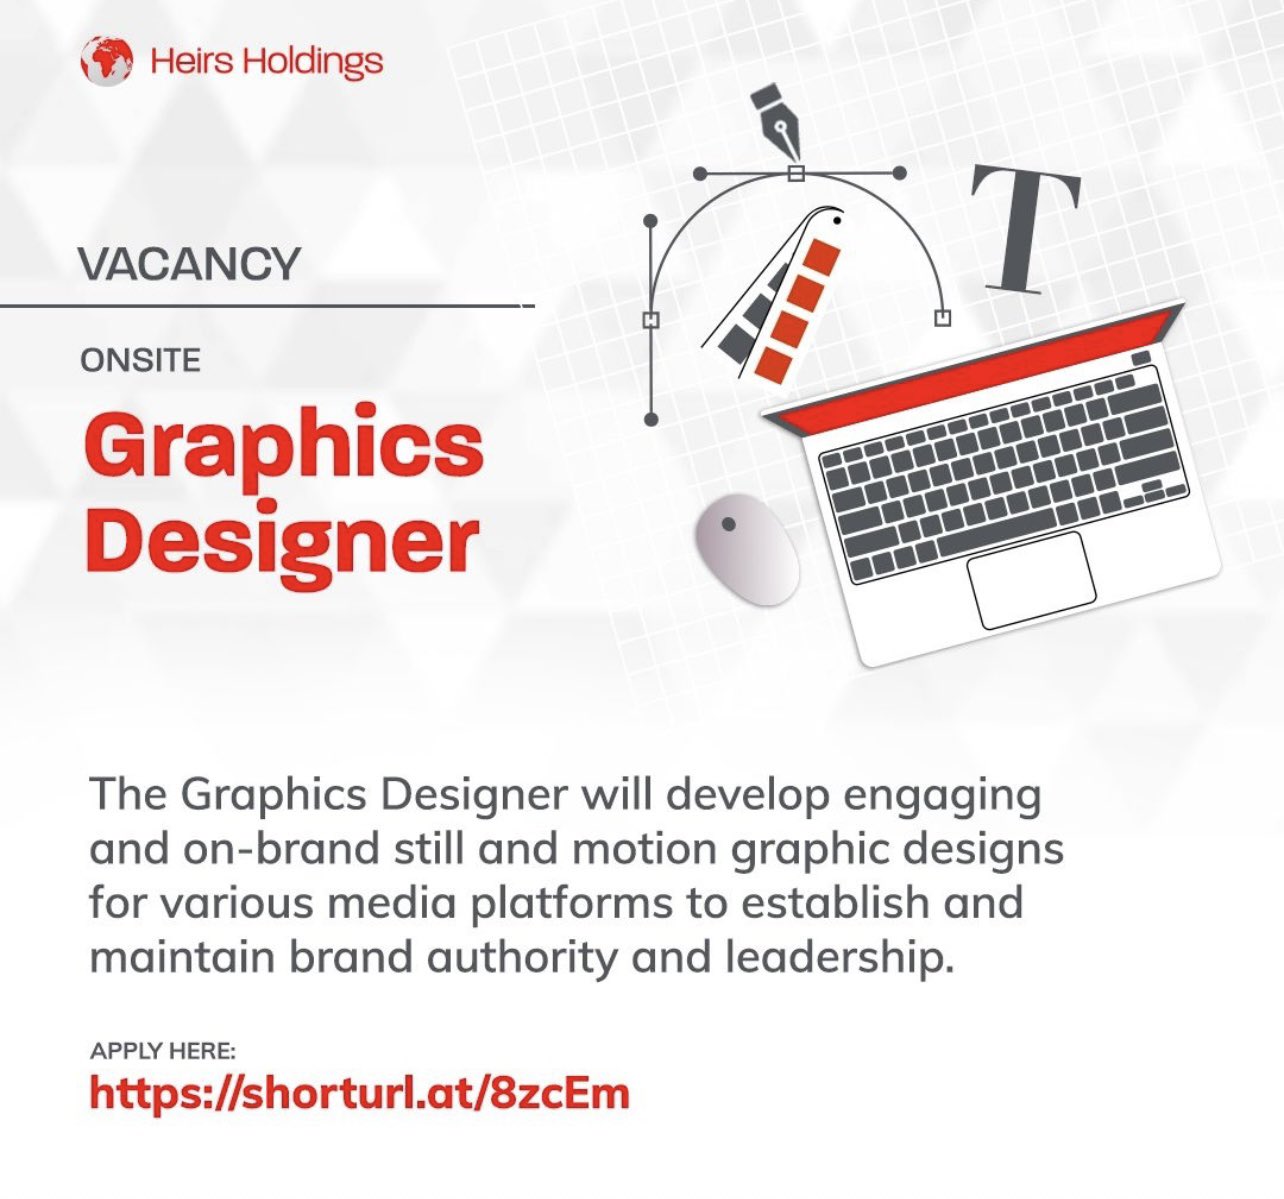 Graphics Designer Needed at Heirs Holdings Ltd